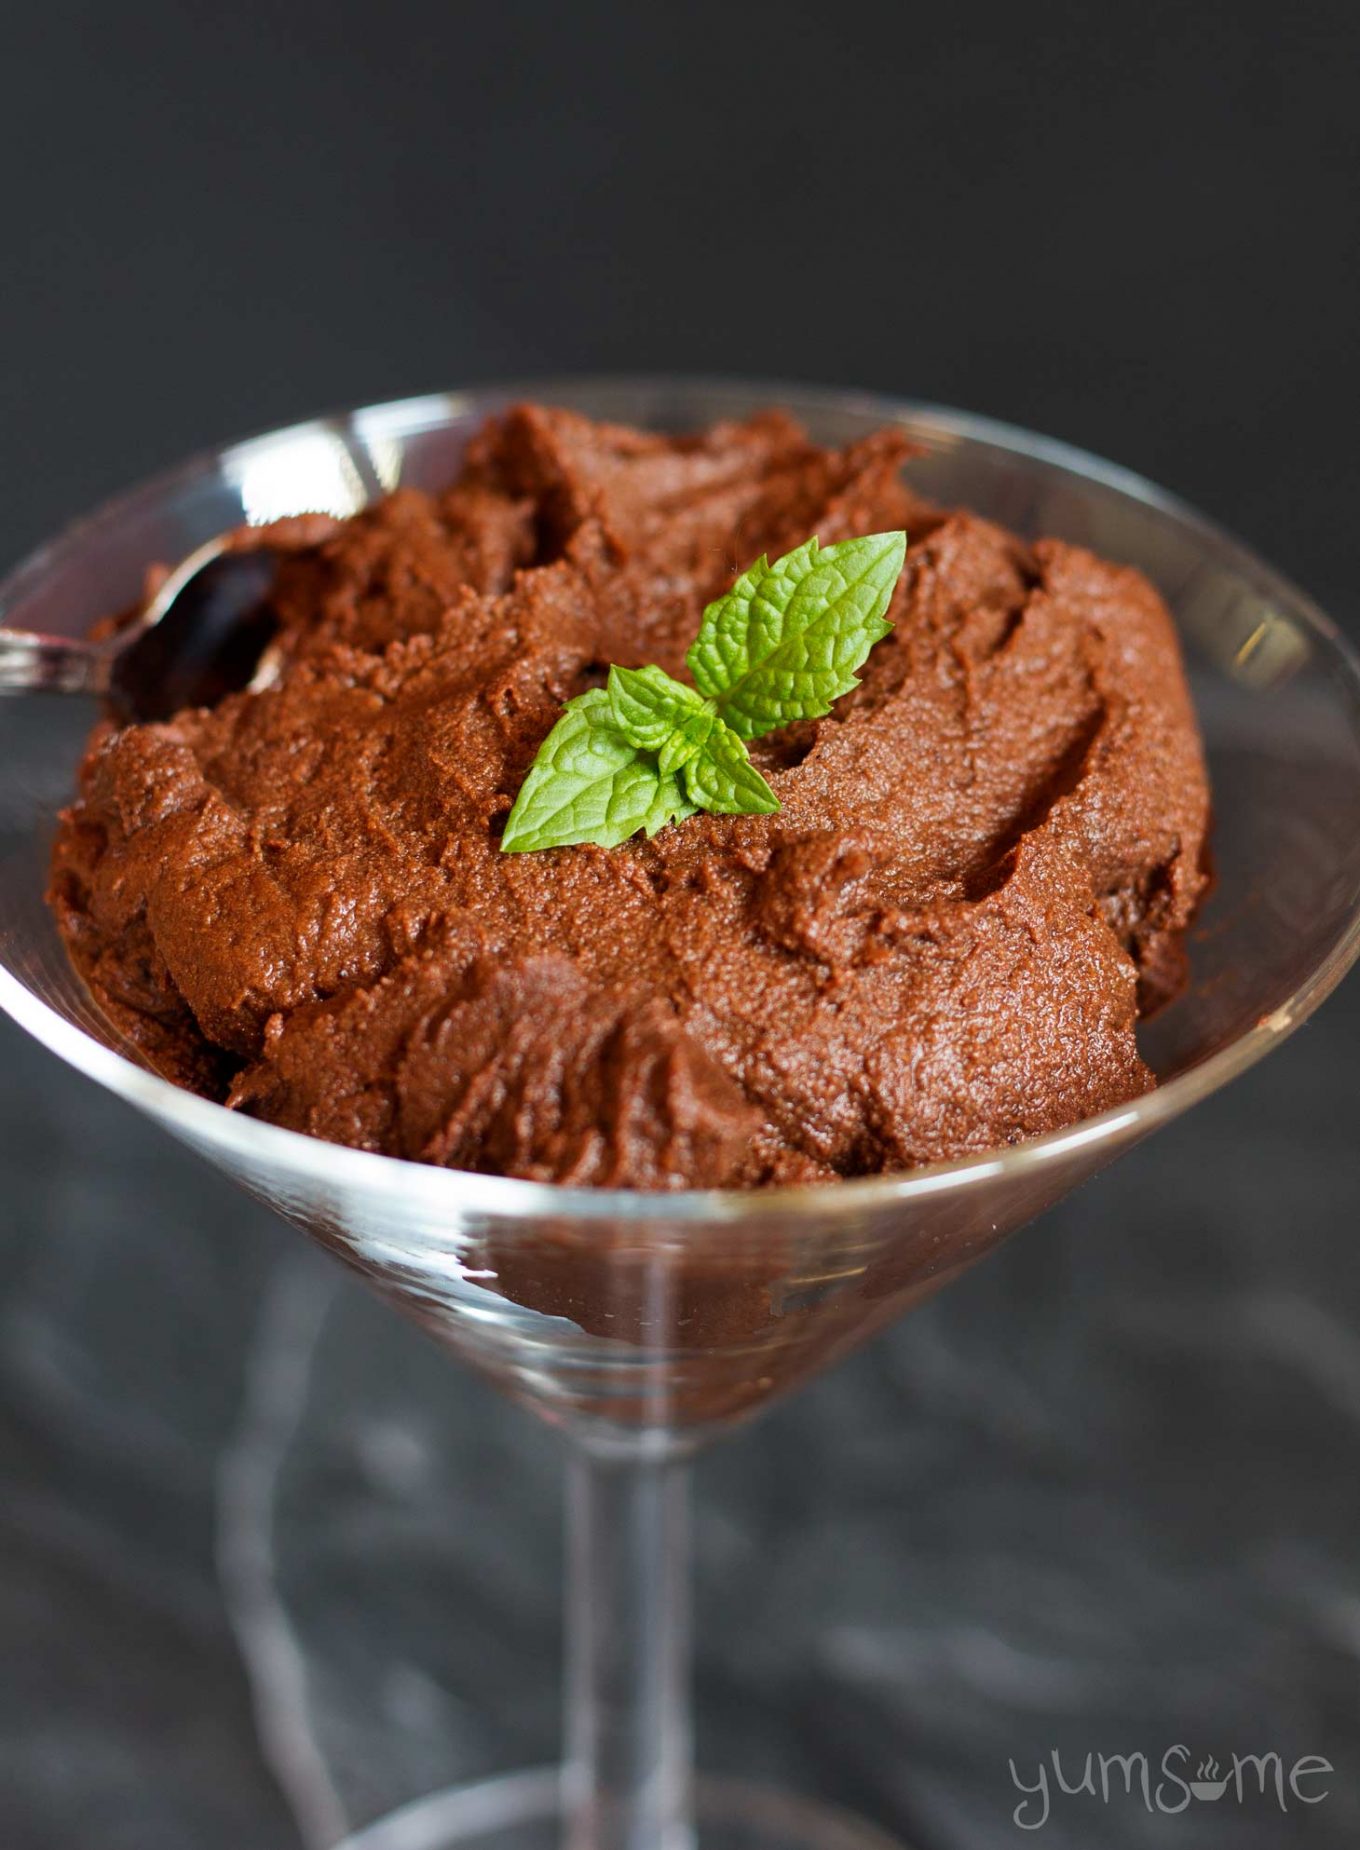 My easy healthy vegan chocolate maple pudding is sweet and velvety-smooth, takes just 10 minutes to make, and is legitimately good for you too! | yumsome.com